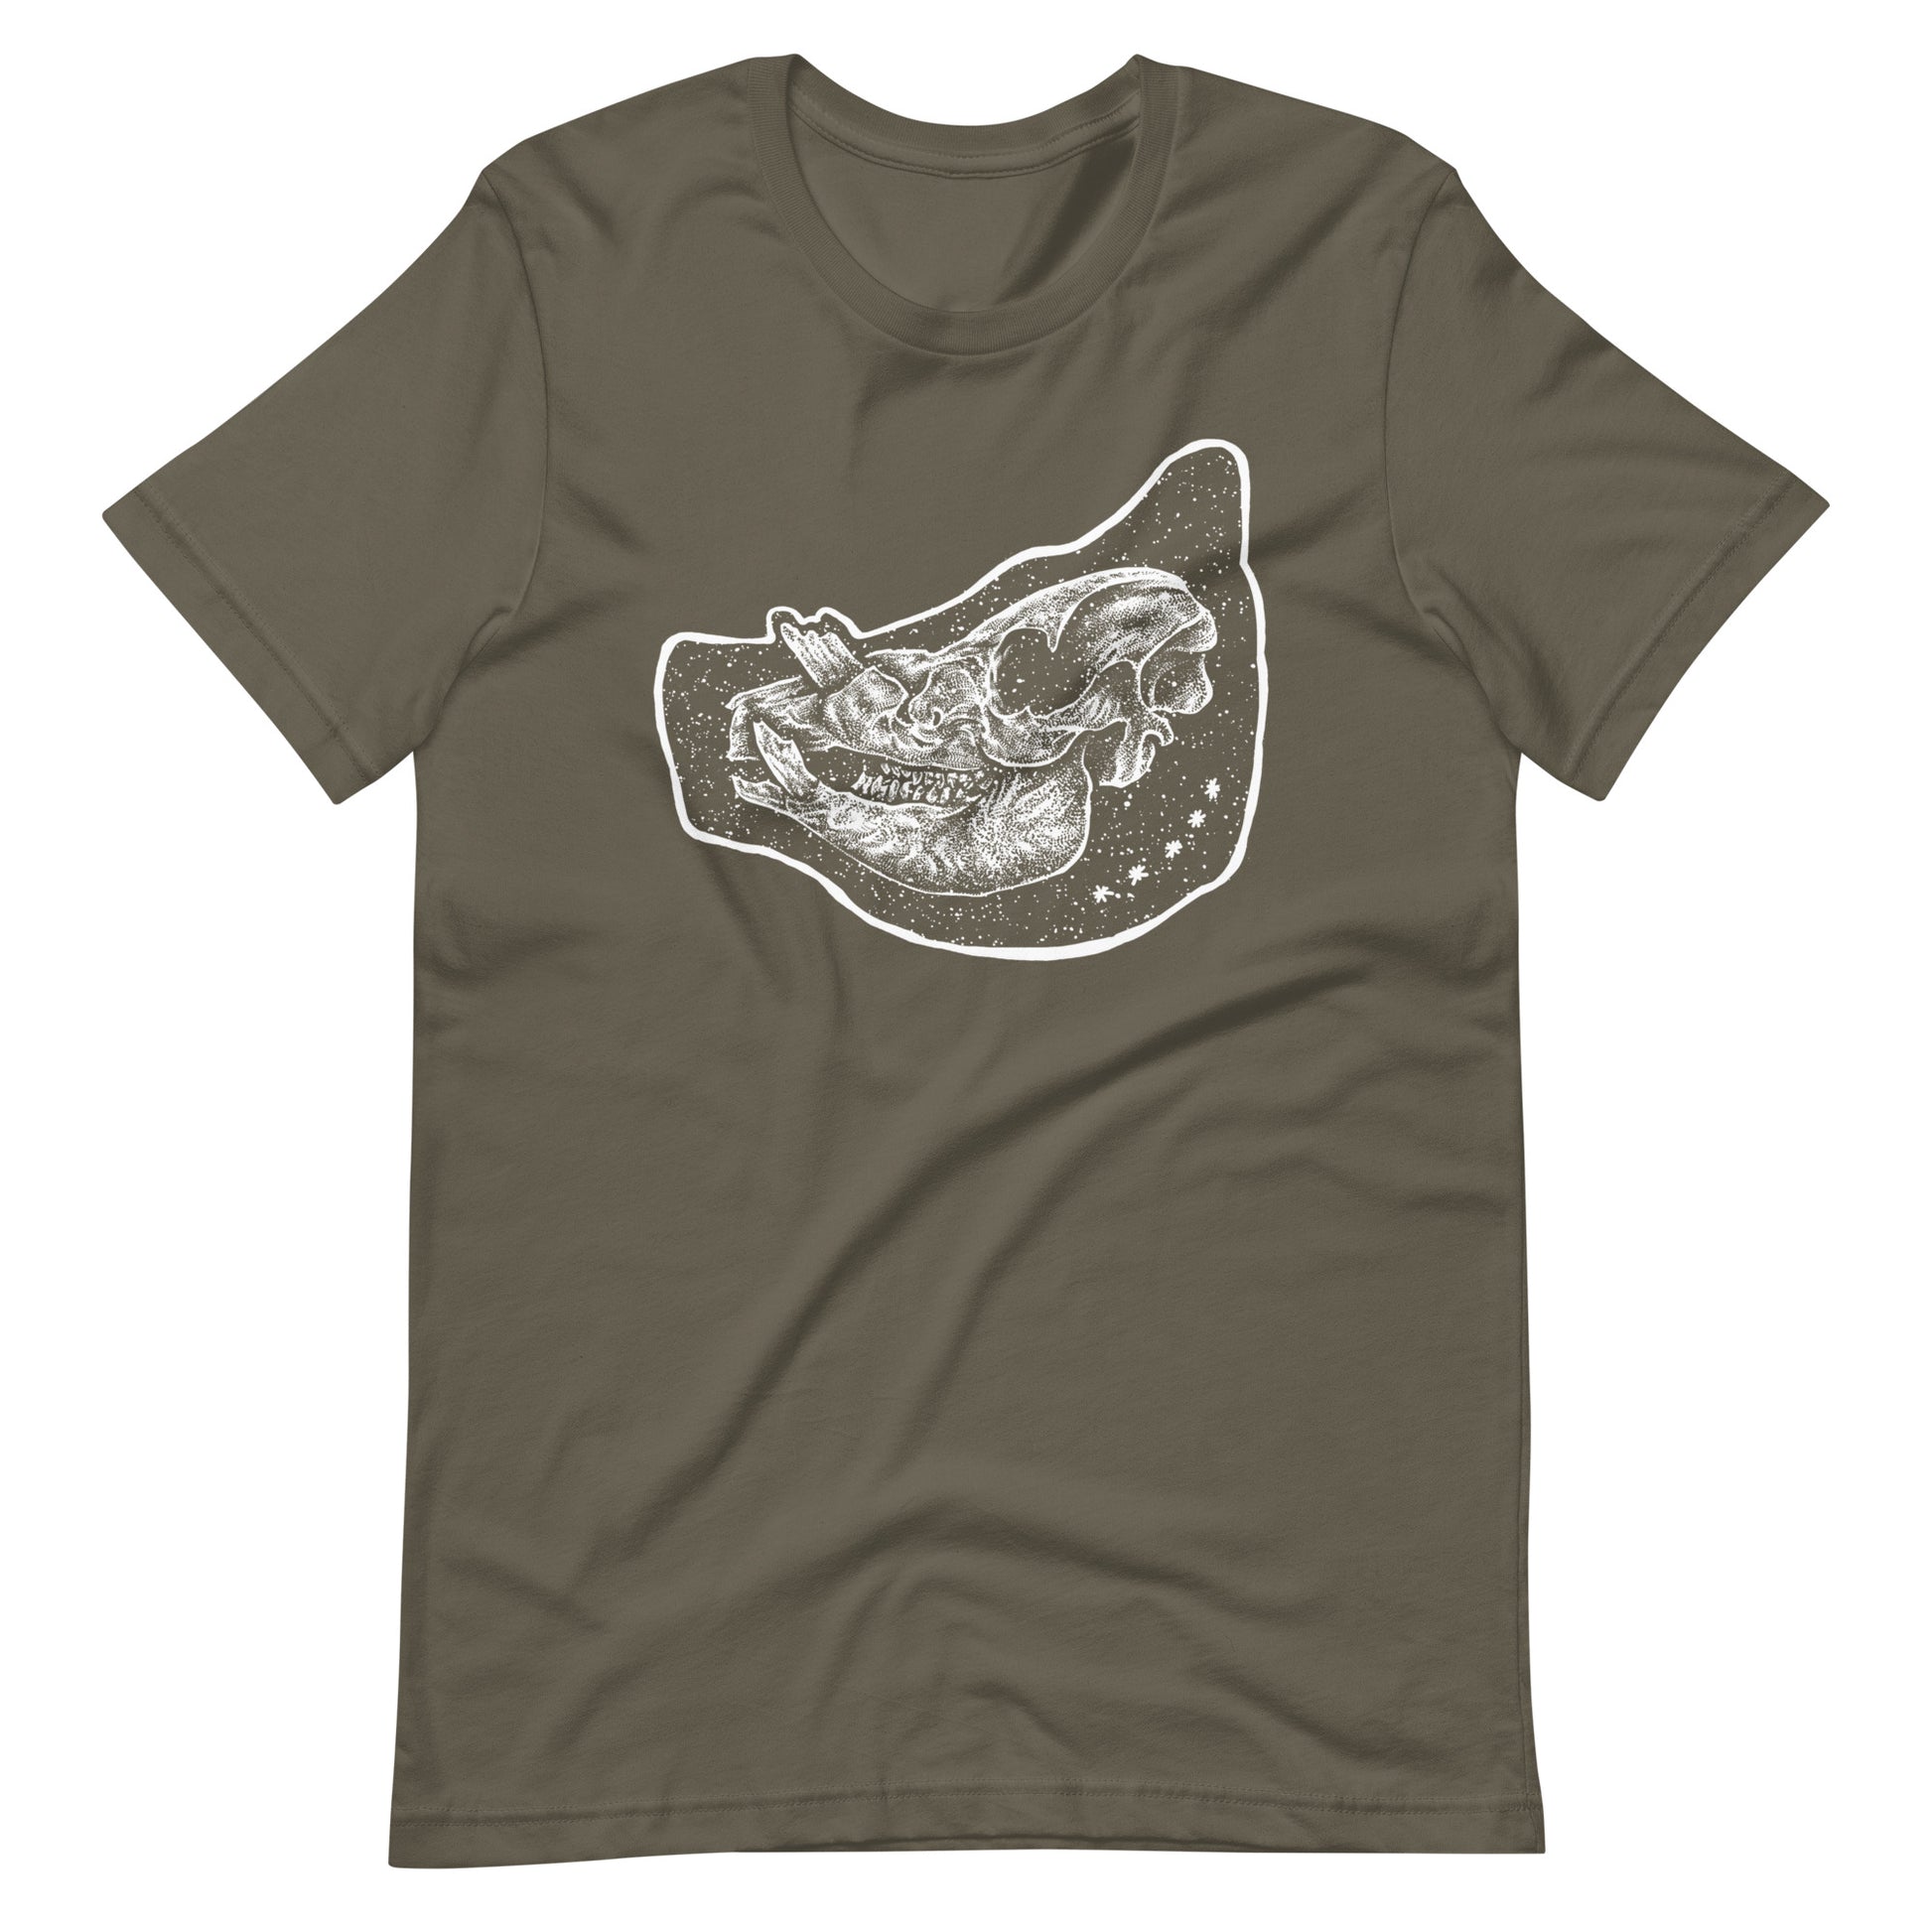 Pig White - Men's t-shirt - Army Front